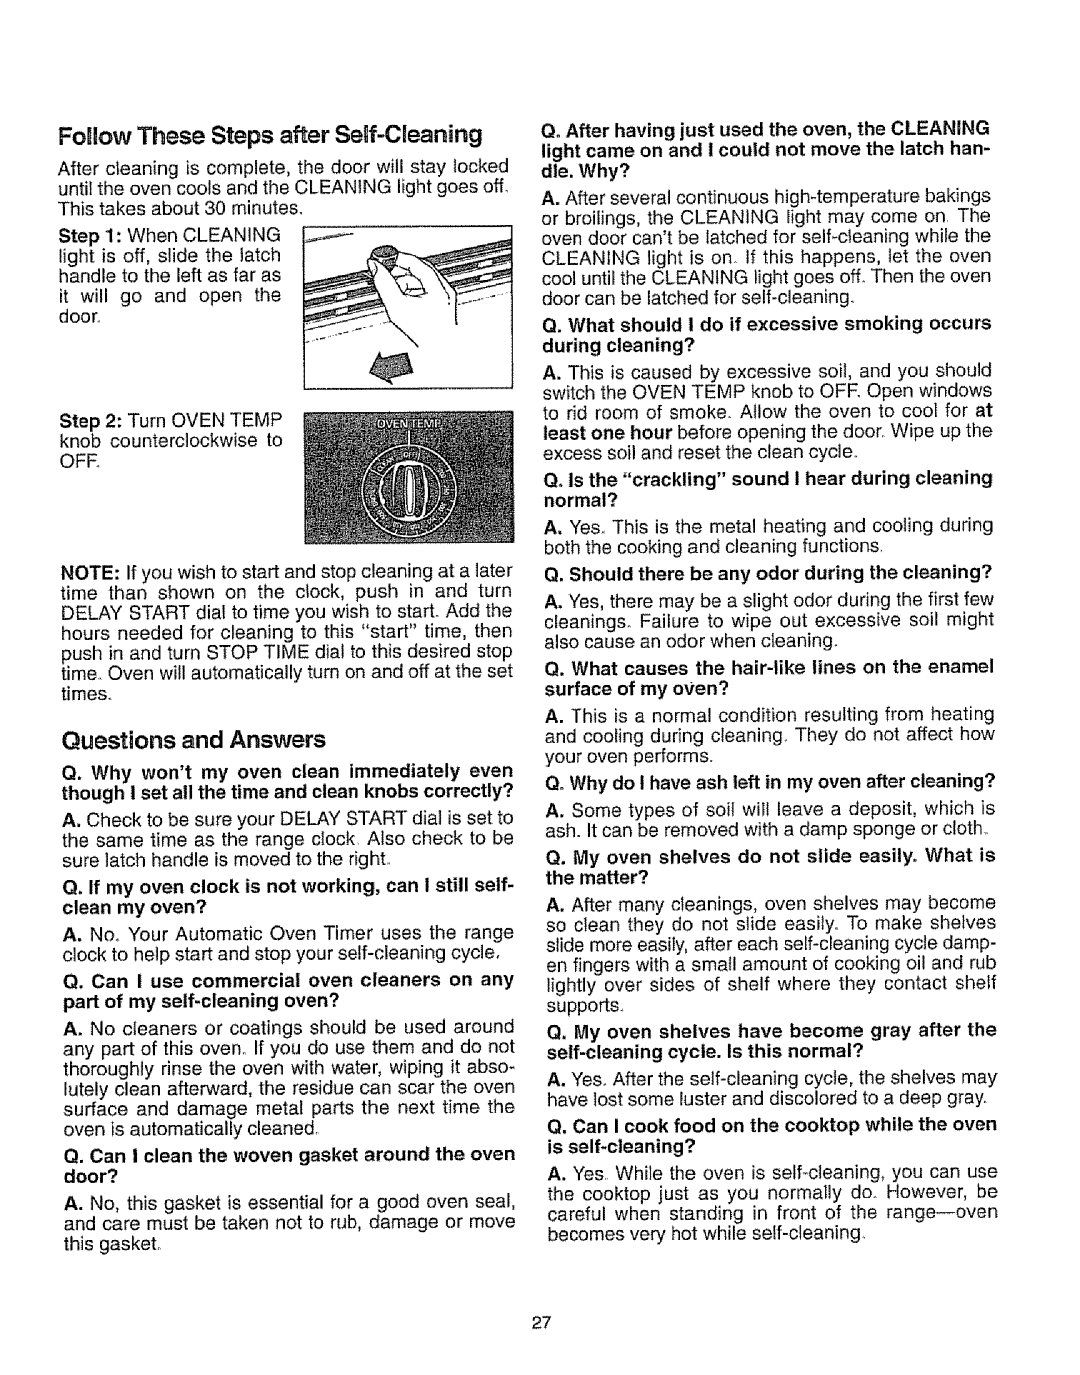 Sears 73328 Follow These Steps after Self-Cleaning, Questions and Answers, Q. Can I use commercial oven cleaners on any 